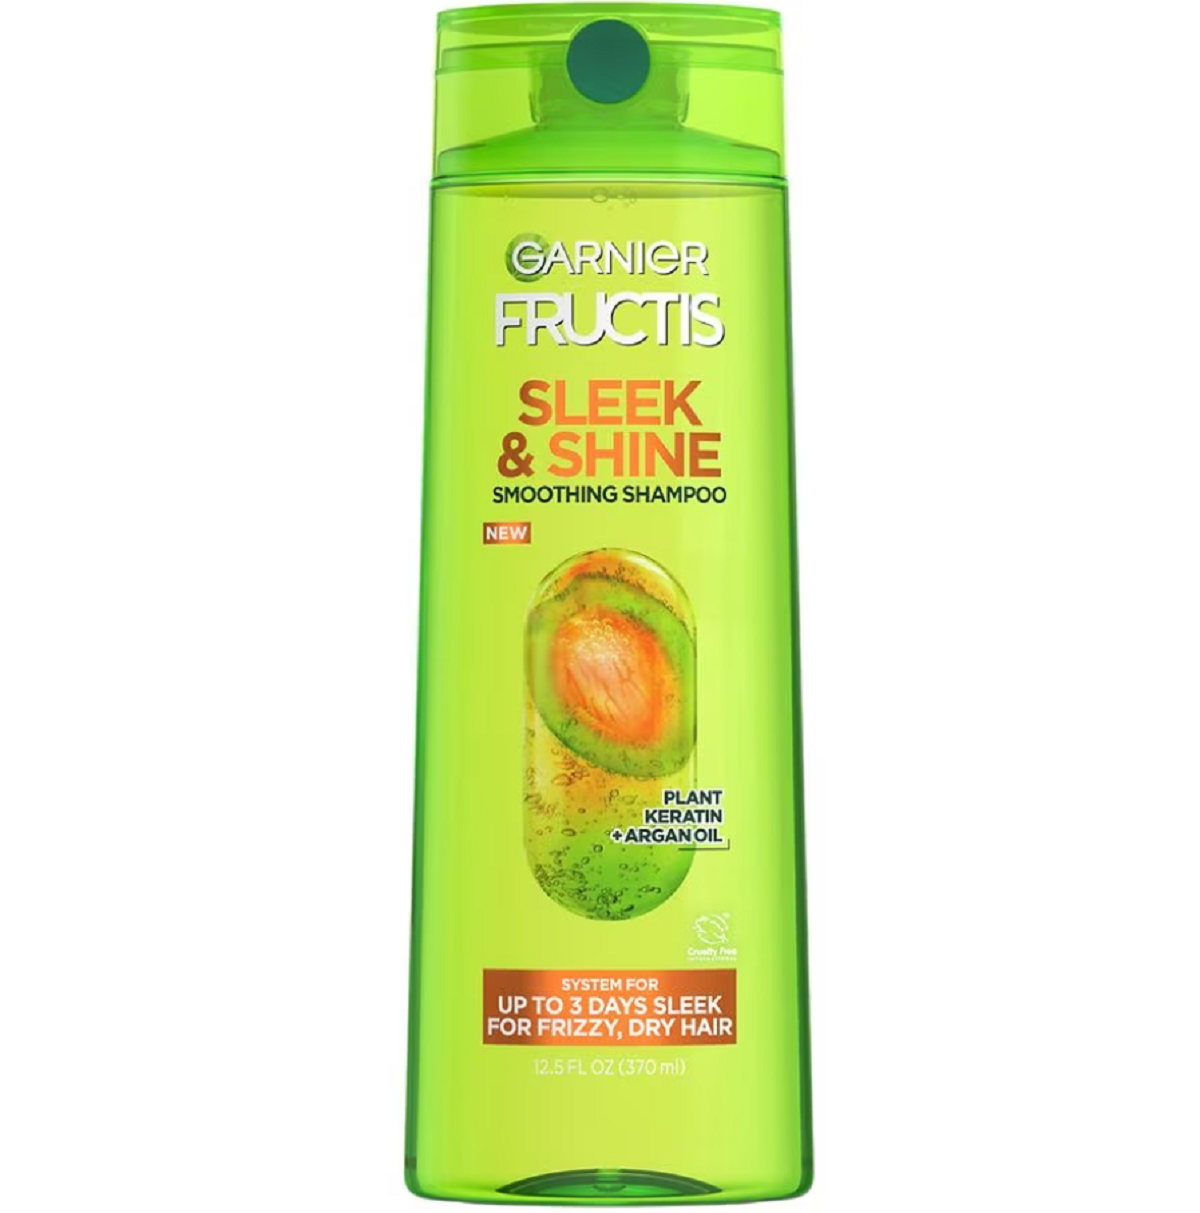 Fortifying Shampoo for Frizzy, Dry Hair12.5fl oz, Garnier Fructis Haircare